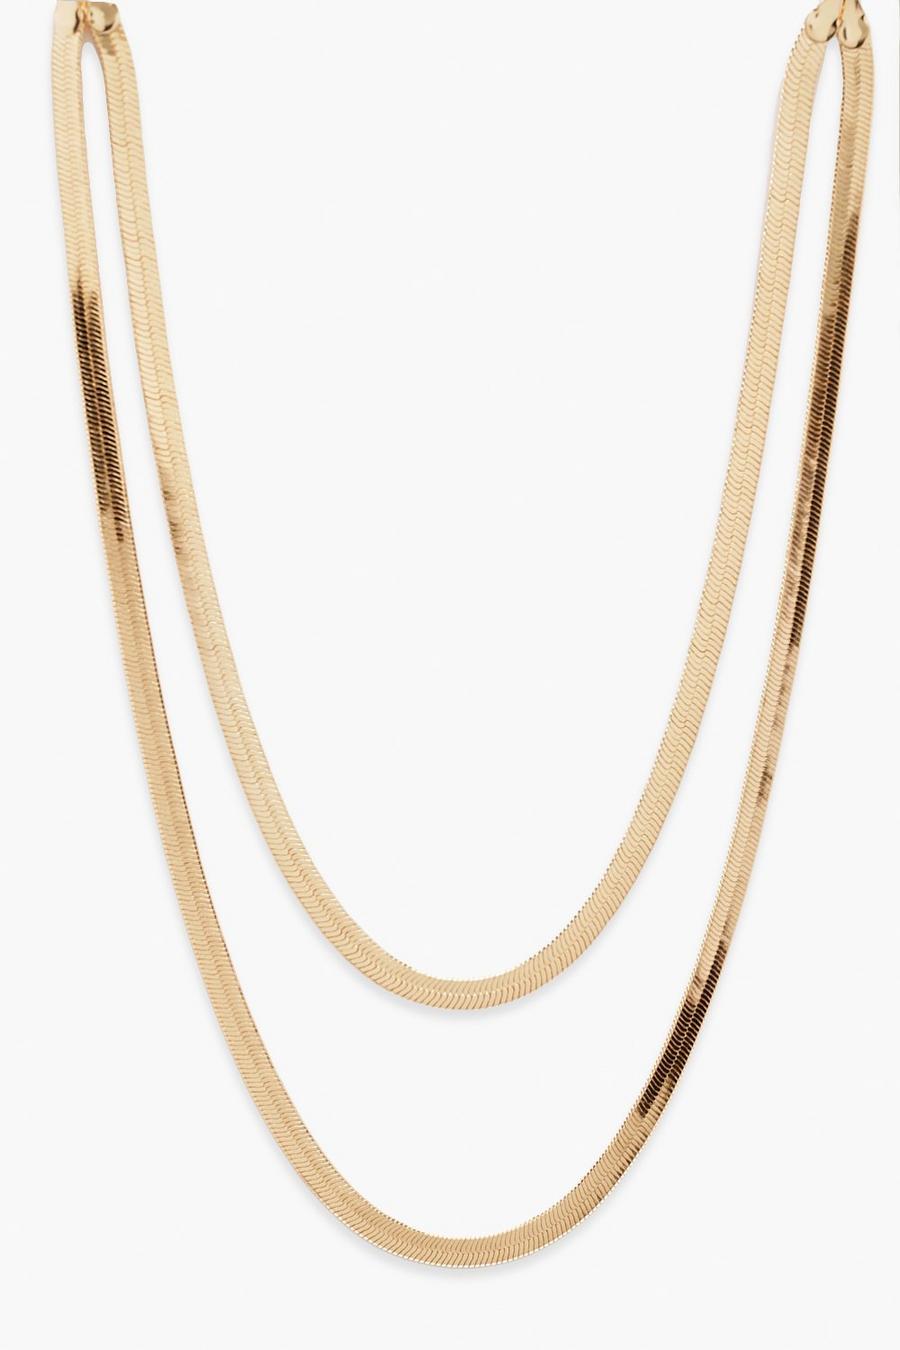 Gold Flat Snake Chain Necklace 